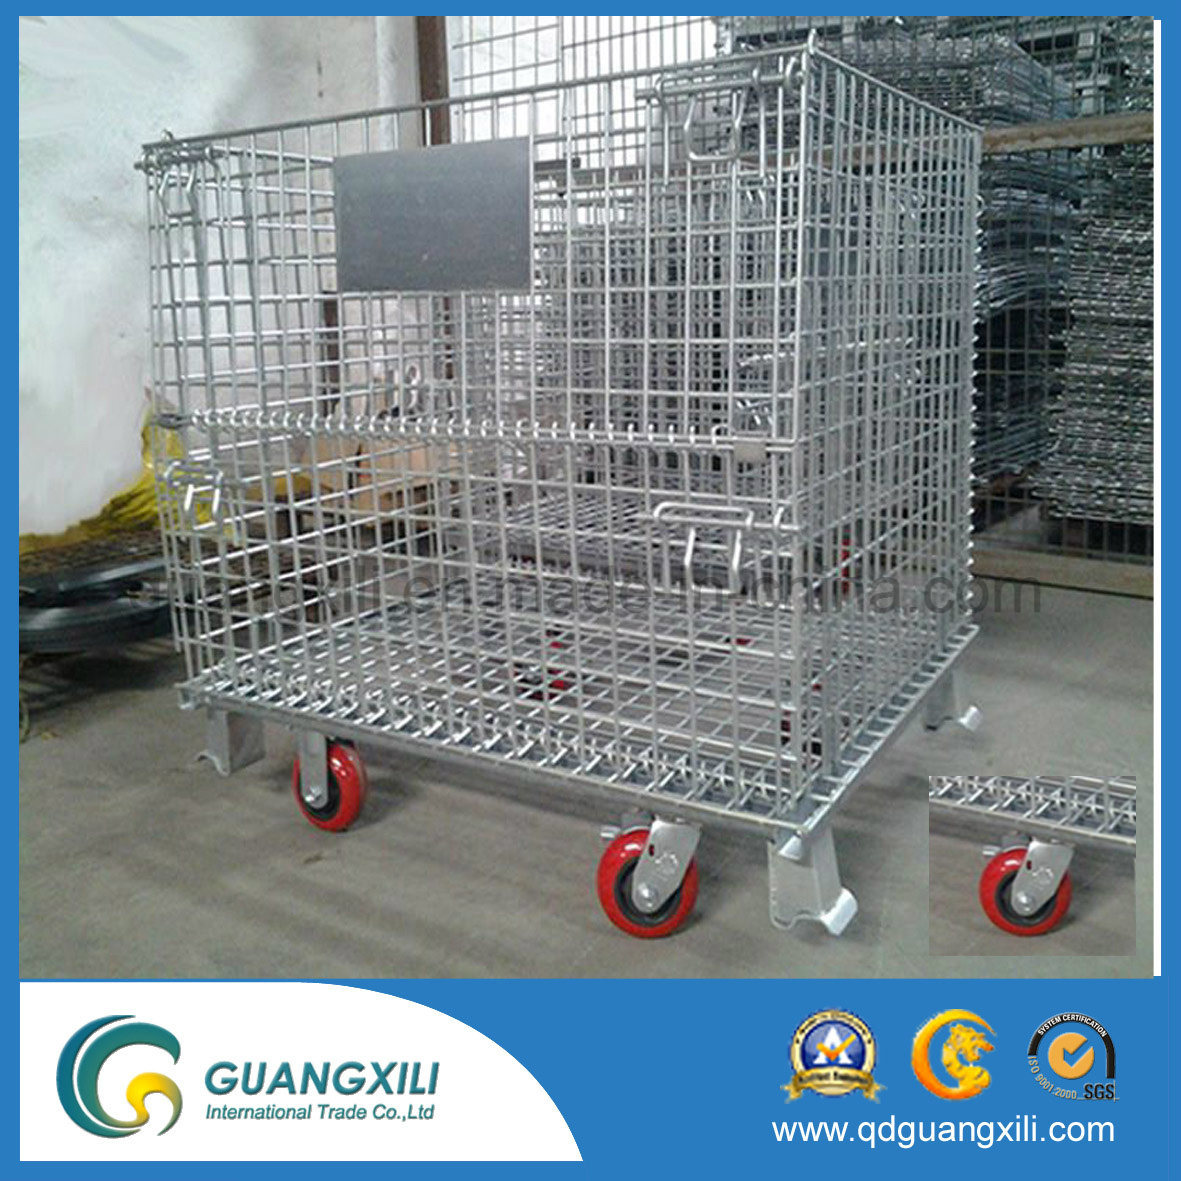 /proimages/2f0j00ZSTtYounhNpl/a-b-c-series-wire-mesh-collapsible-storage-rack-with-casters.jpg